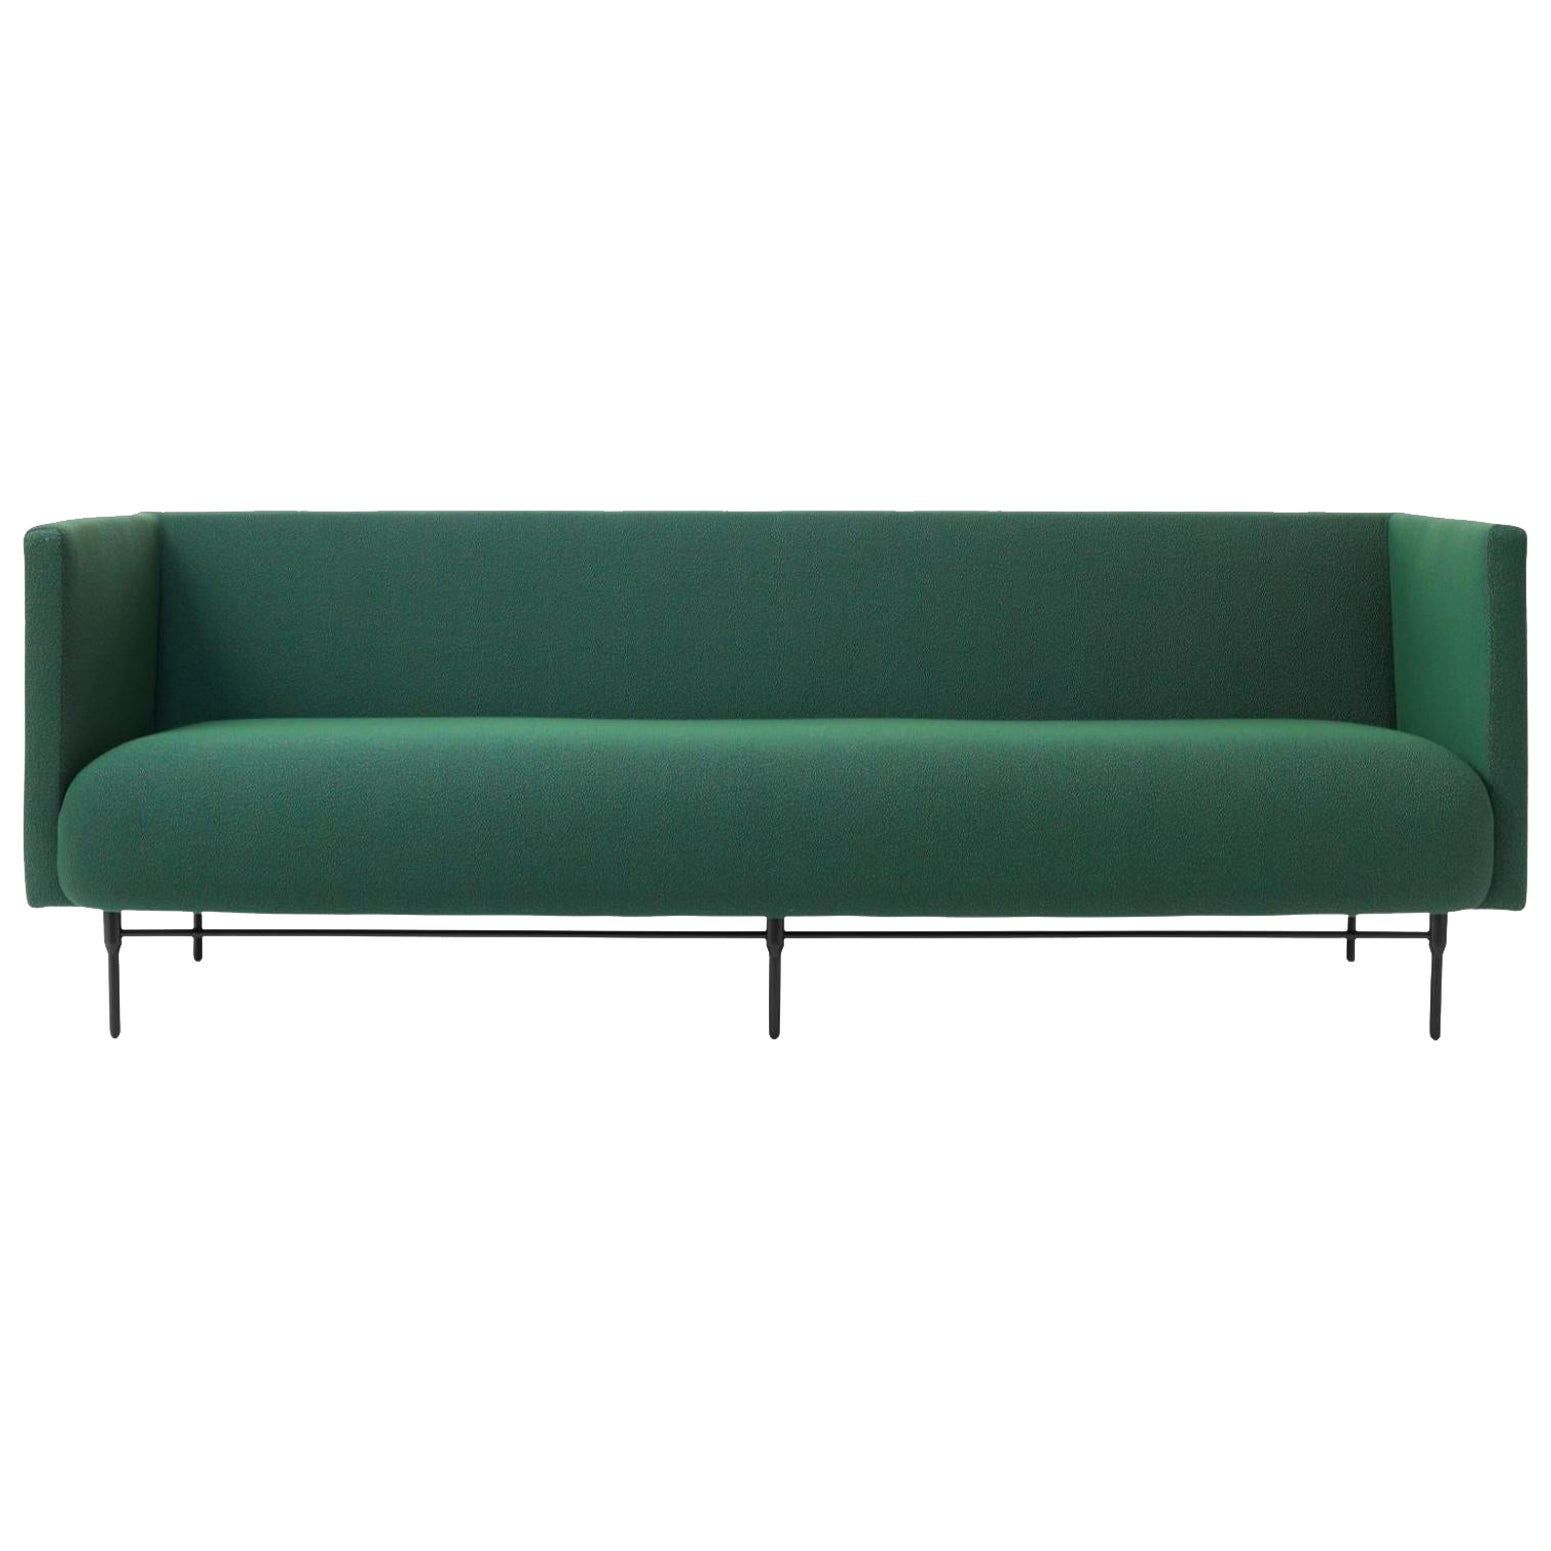 Galore 3 Seater Sprinkles Hunter Green by Warm Nordic For Sale